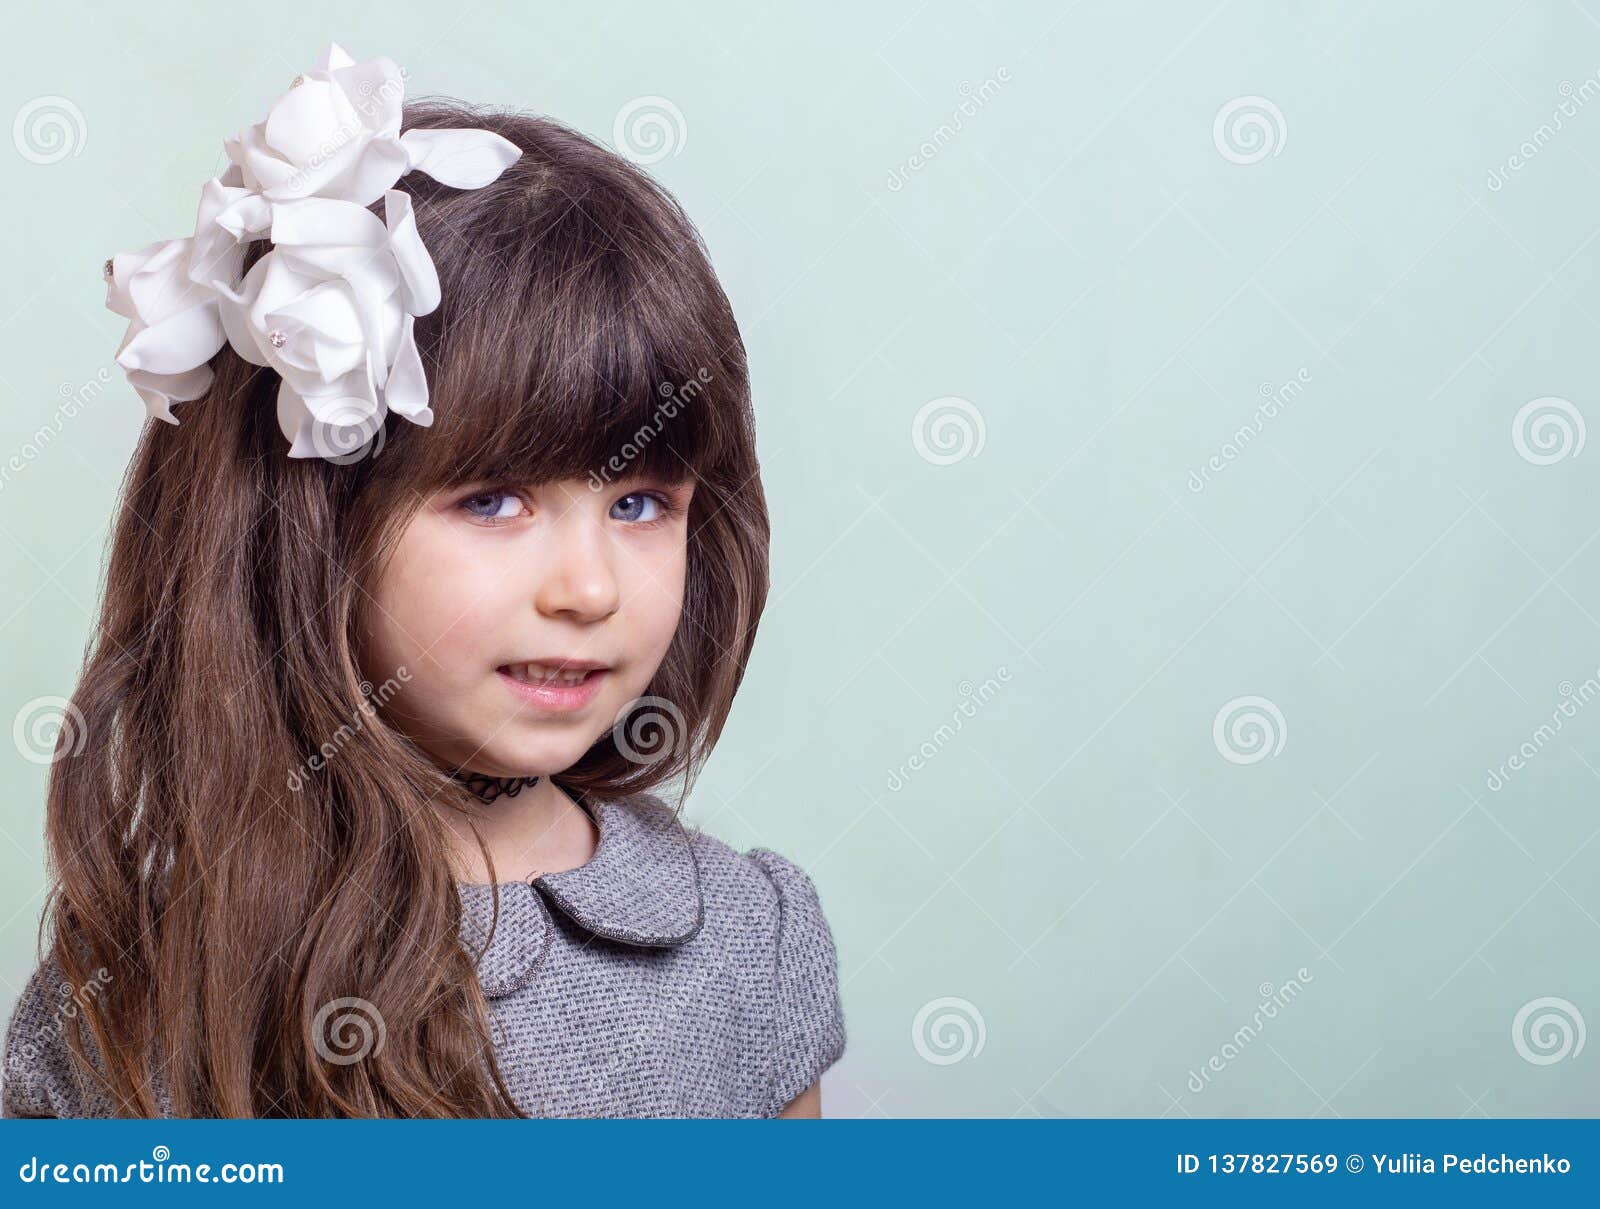 Sweet Little Girl with Curly Hair and White Flowers in Haircut. Cute  Stylish Child on Blue Background Stock Image - Image of face, fashion:  137827569